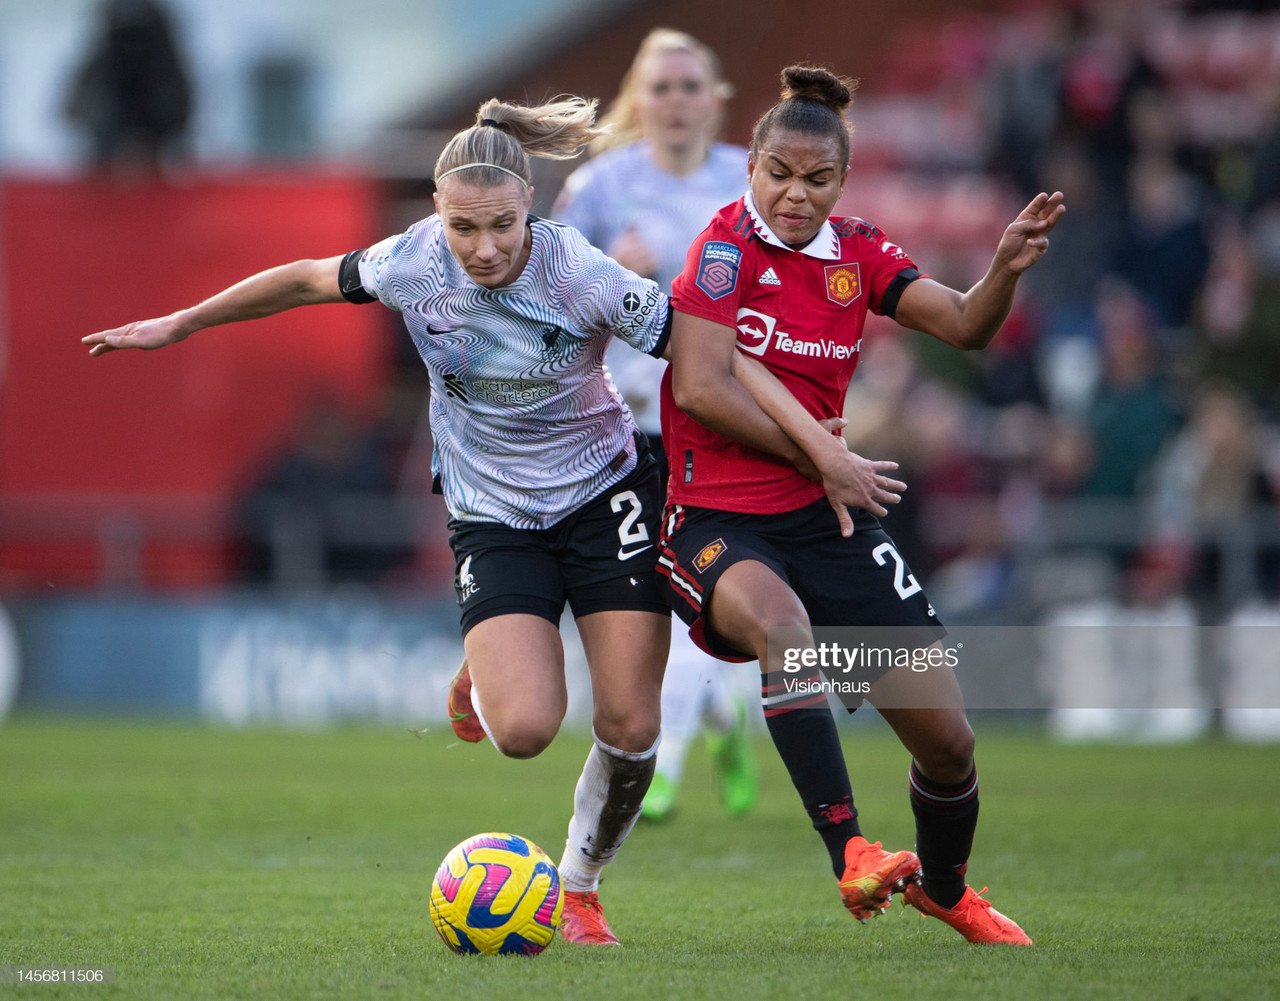 Liverpool vs Manchester United: Women's Super League Preview, Gameweek 22, 2023